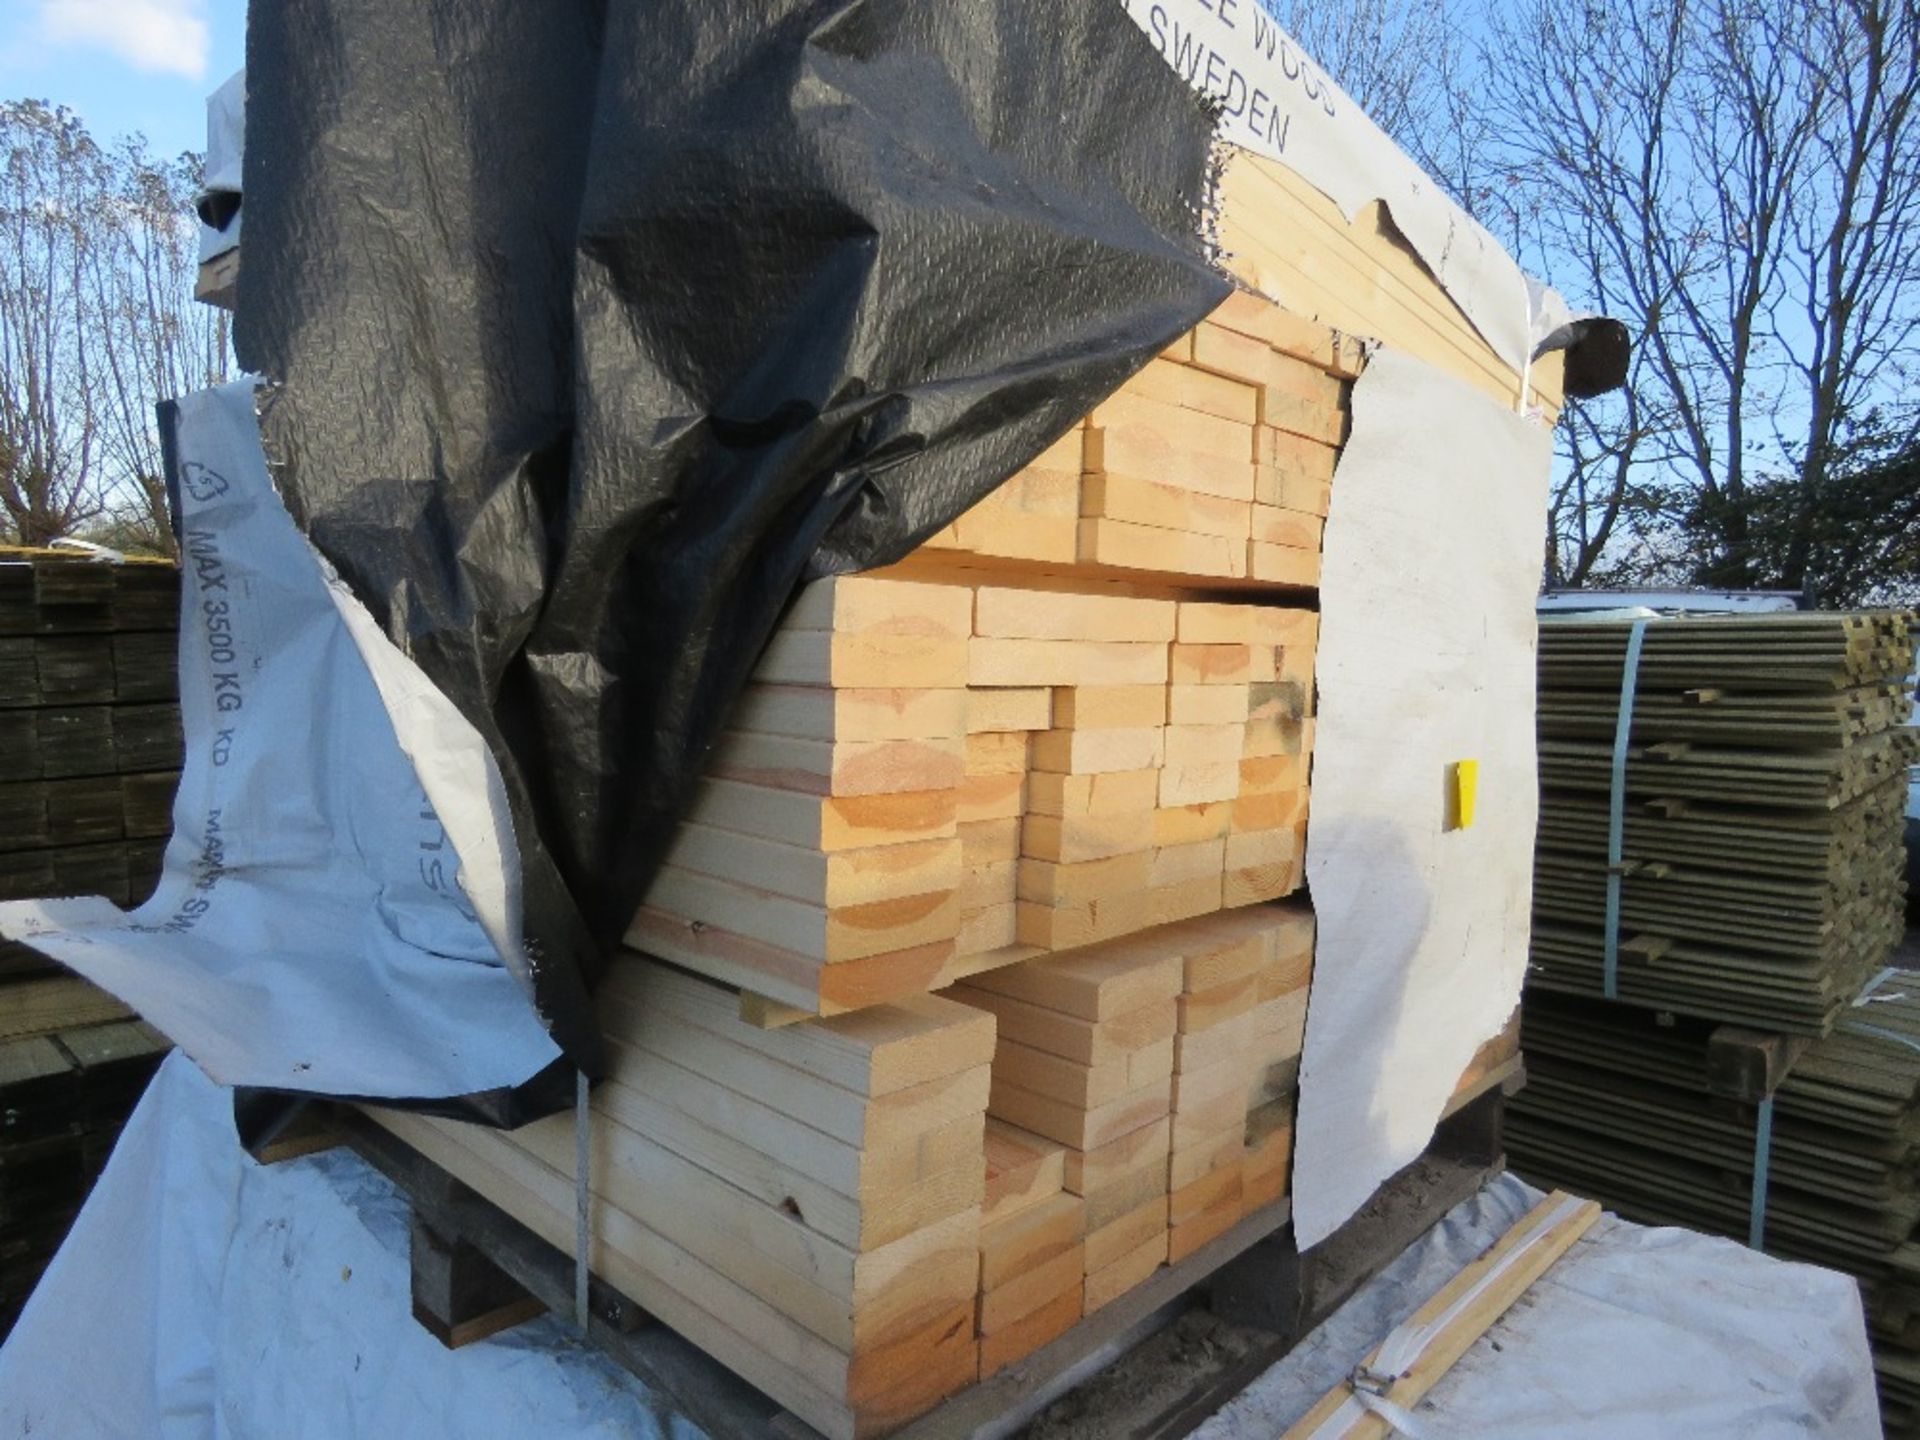 PALLET OF UNTREATED TIMBER BOARDS 1M LENGTH X 100MM X 25MM APPROX.